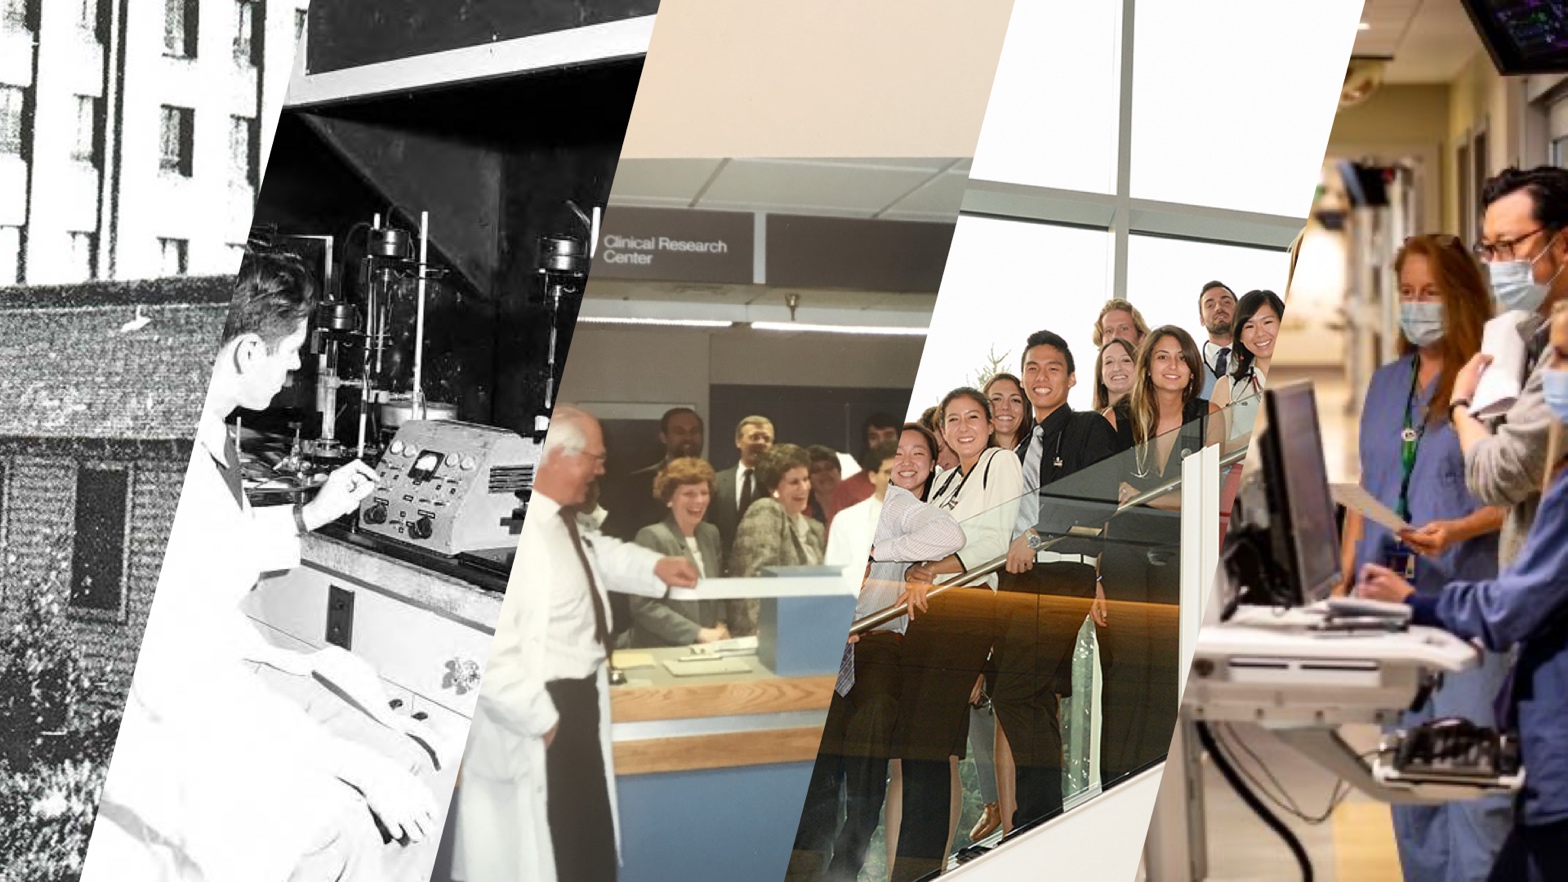 A compilation of images showing a brief history of the Department of Medicine.